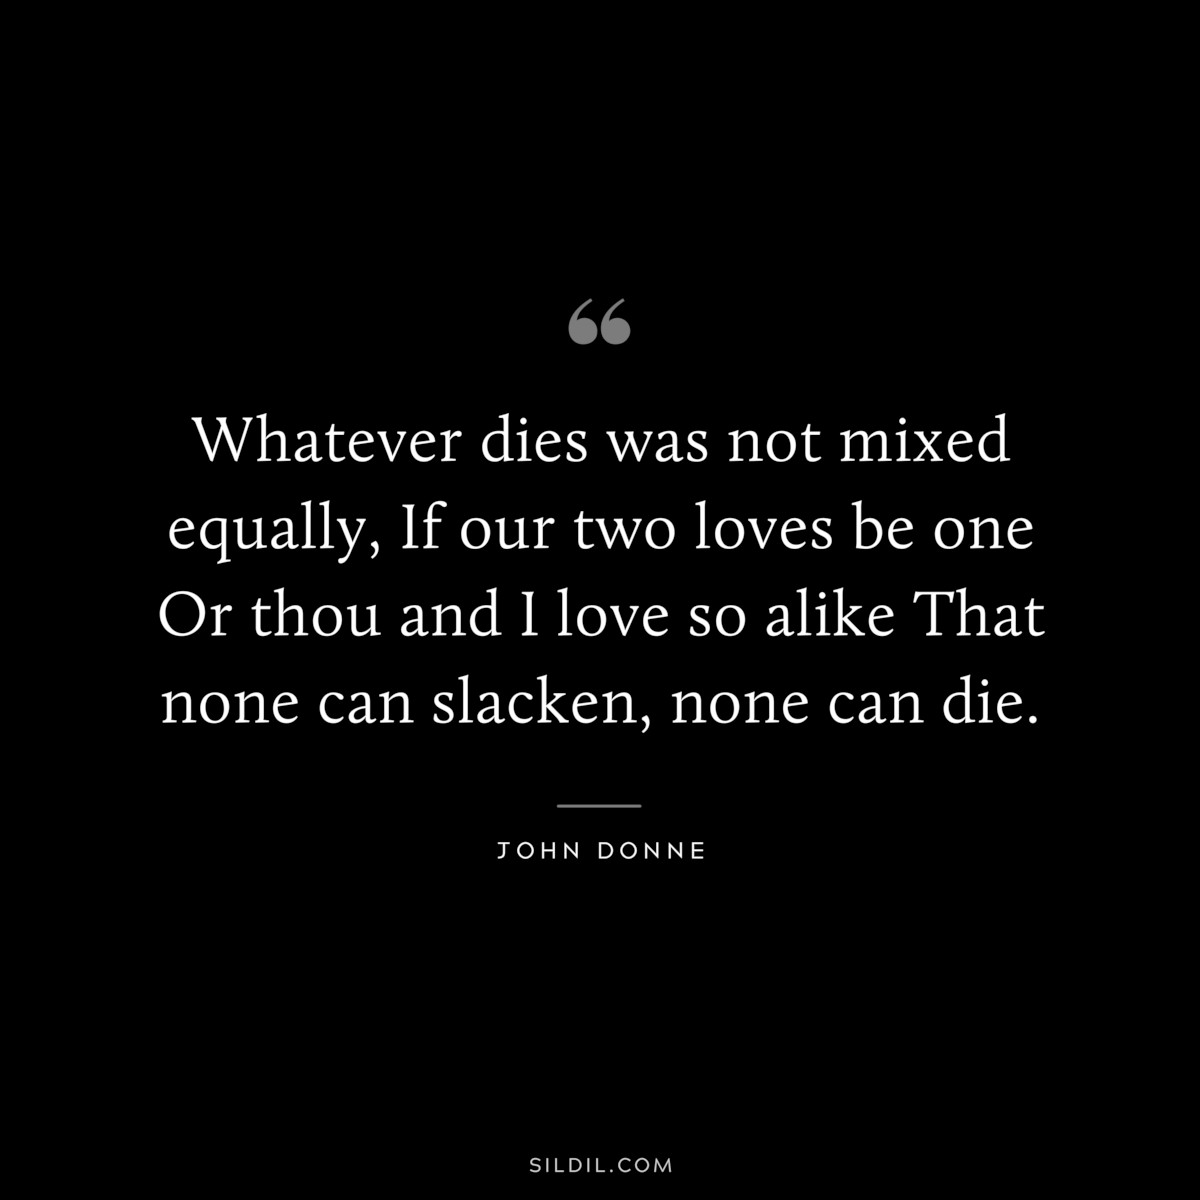 Whatever dies was not mixed equally, If our two loves be one Or thou and I love so alike That none can slacken, none can die. ― John Donne